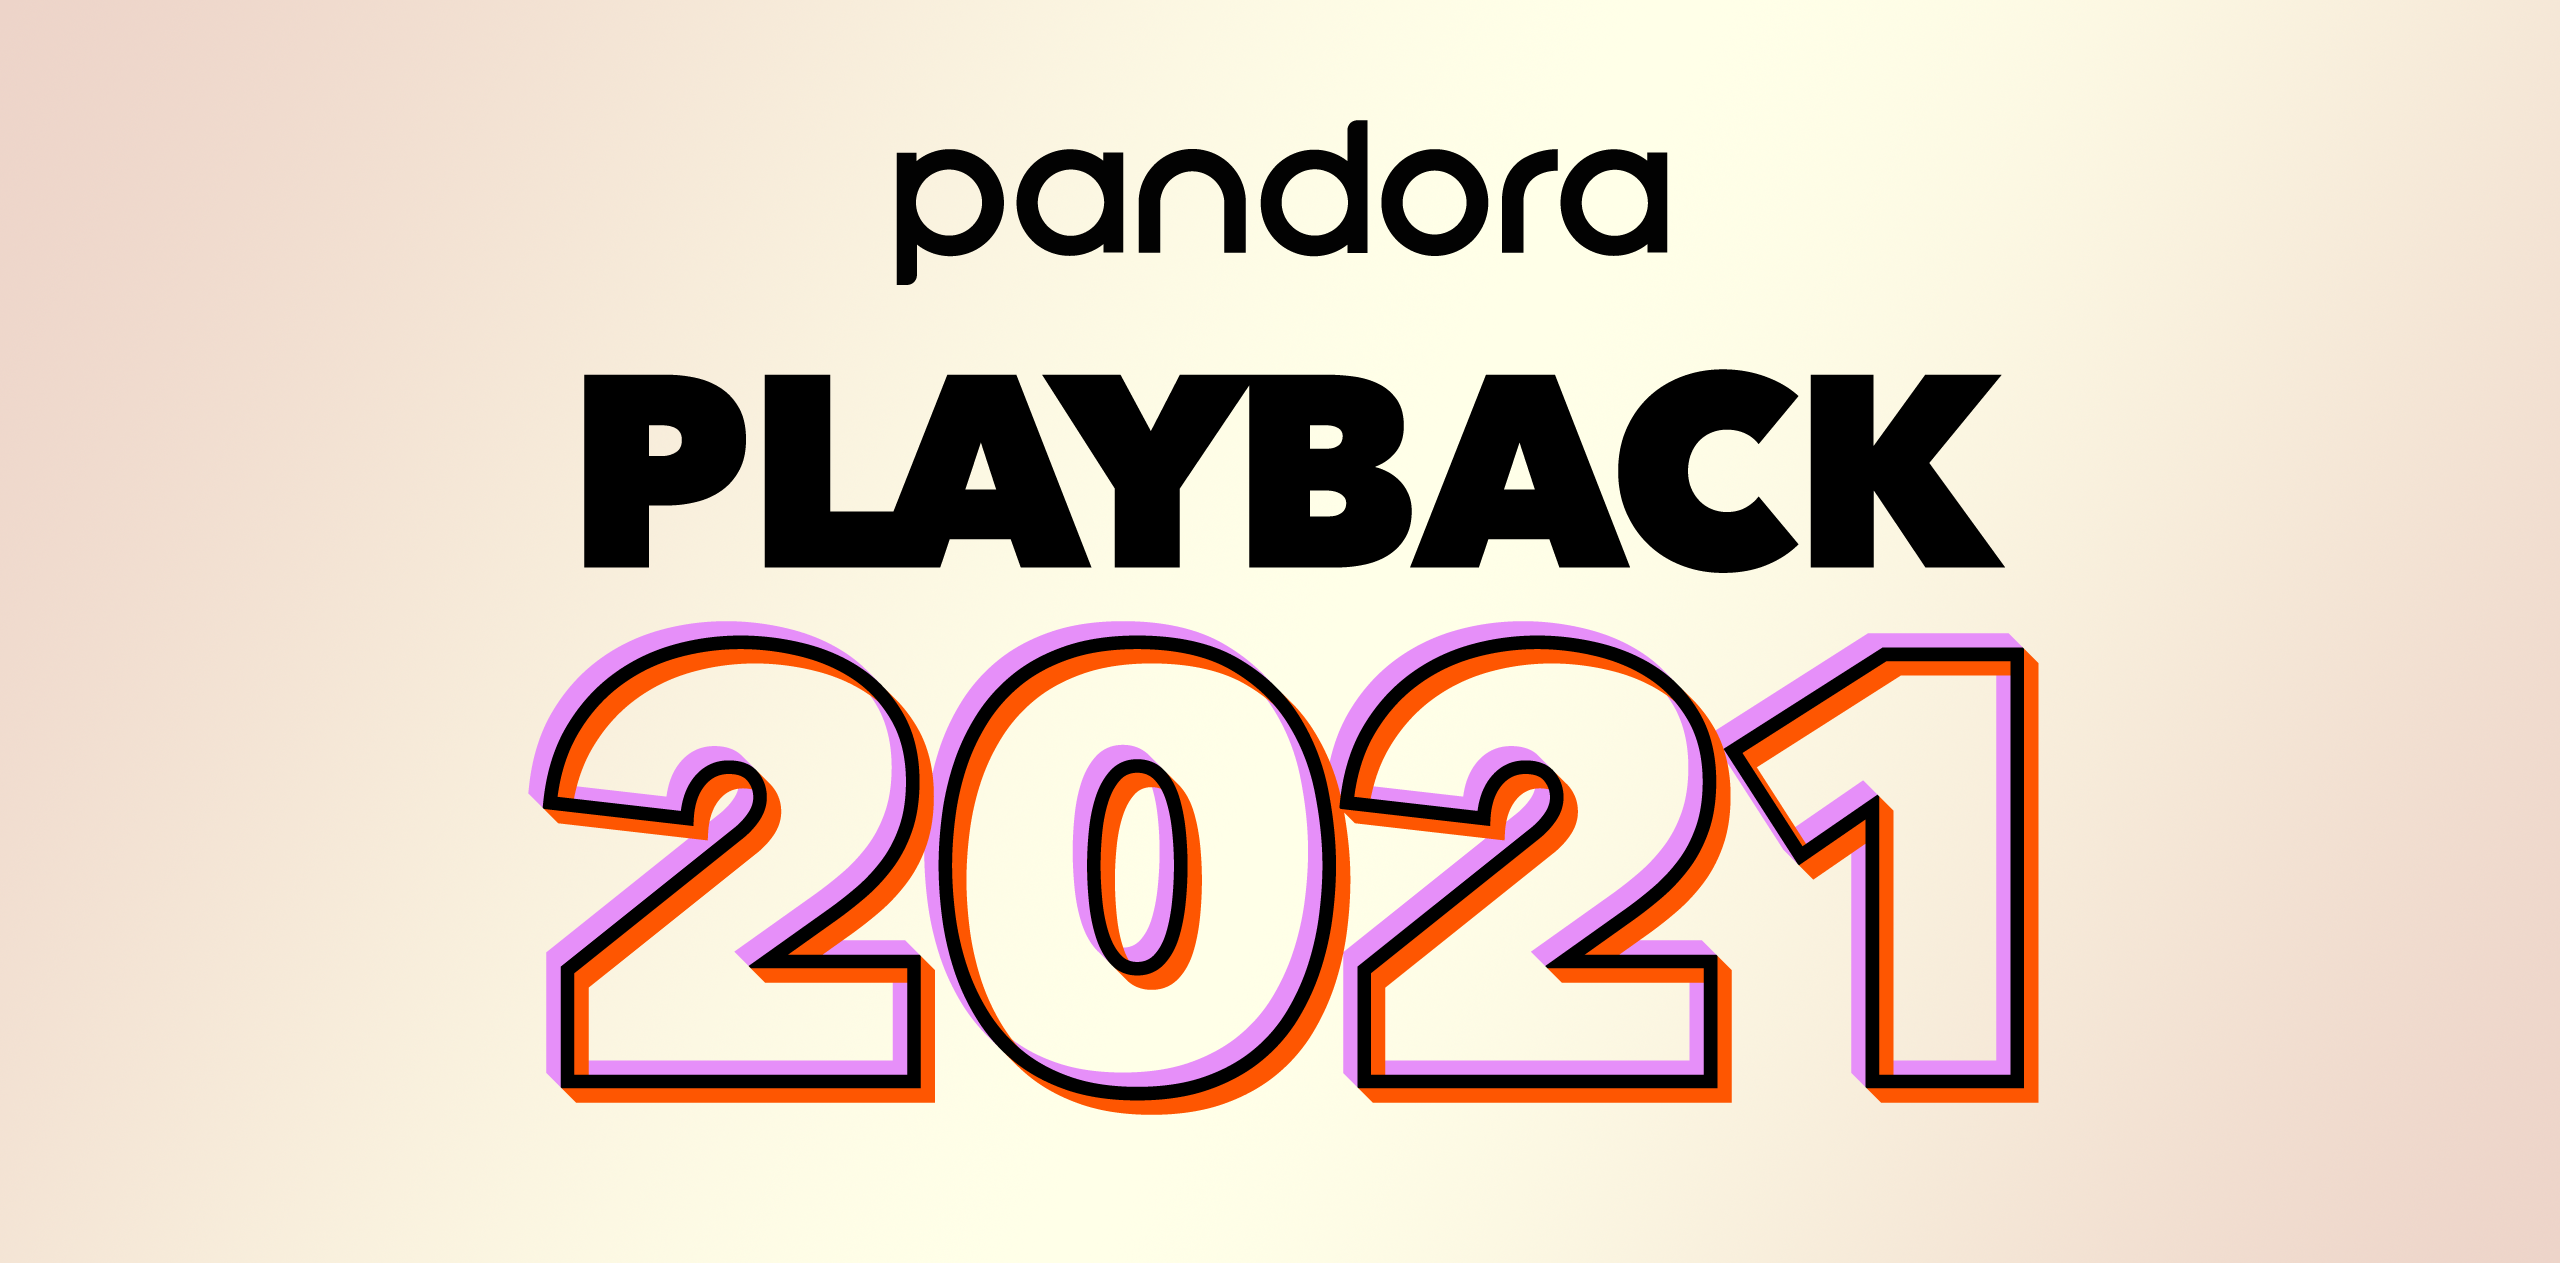 Pandora Playback 2021: How to find your top songs, artists, albums, stations, podcasts and more